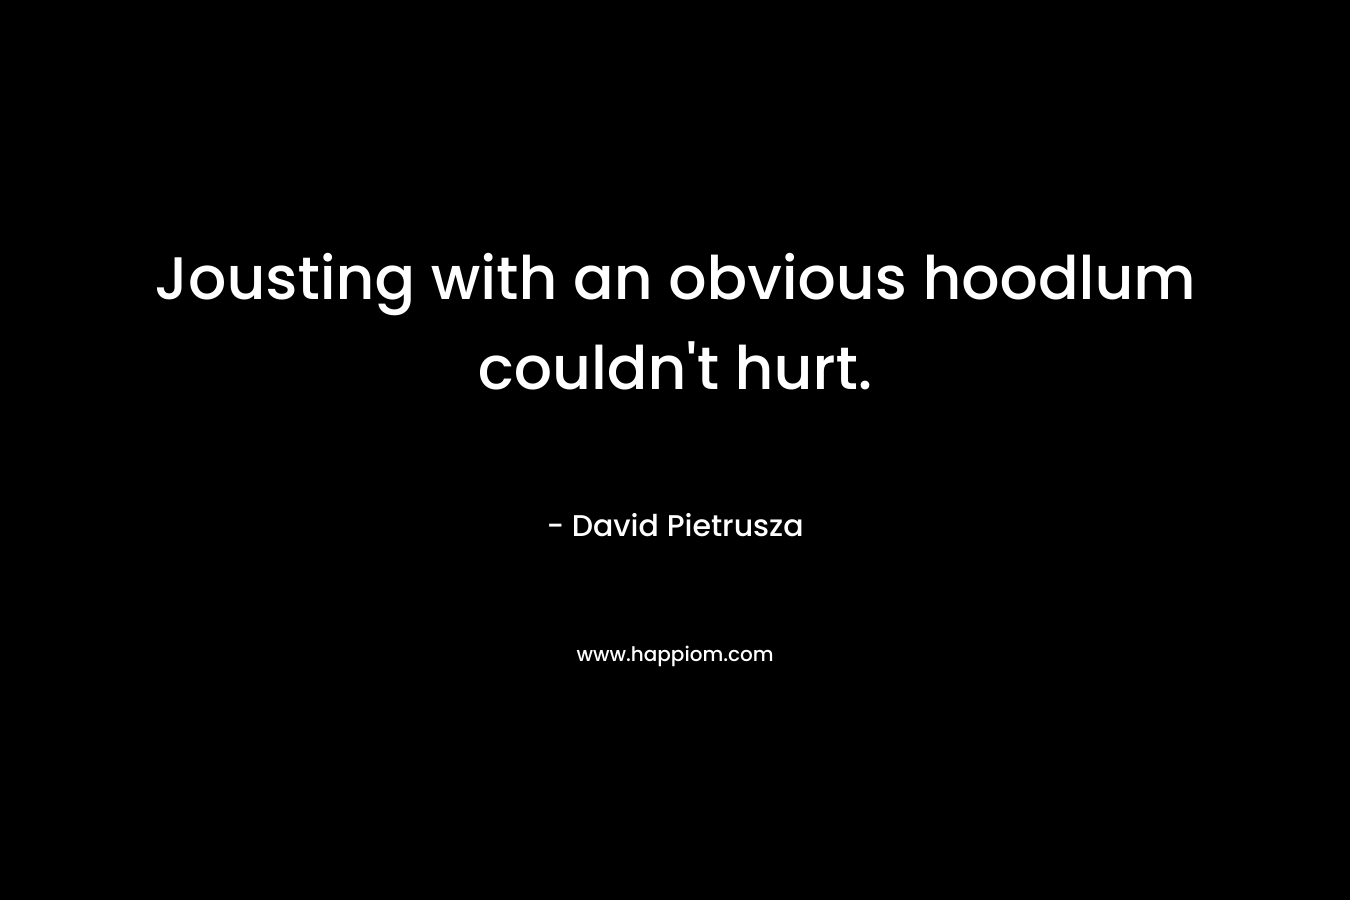 Jousting with an obvious hoodlum couldn’t hurt. – David Pietrusza